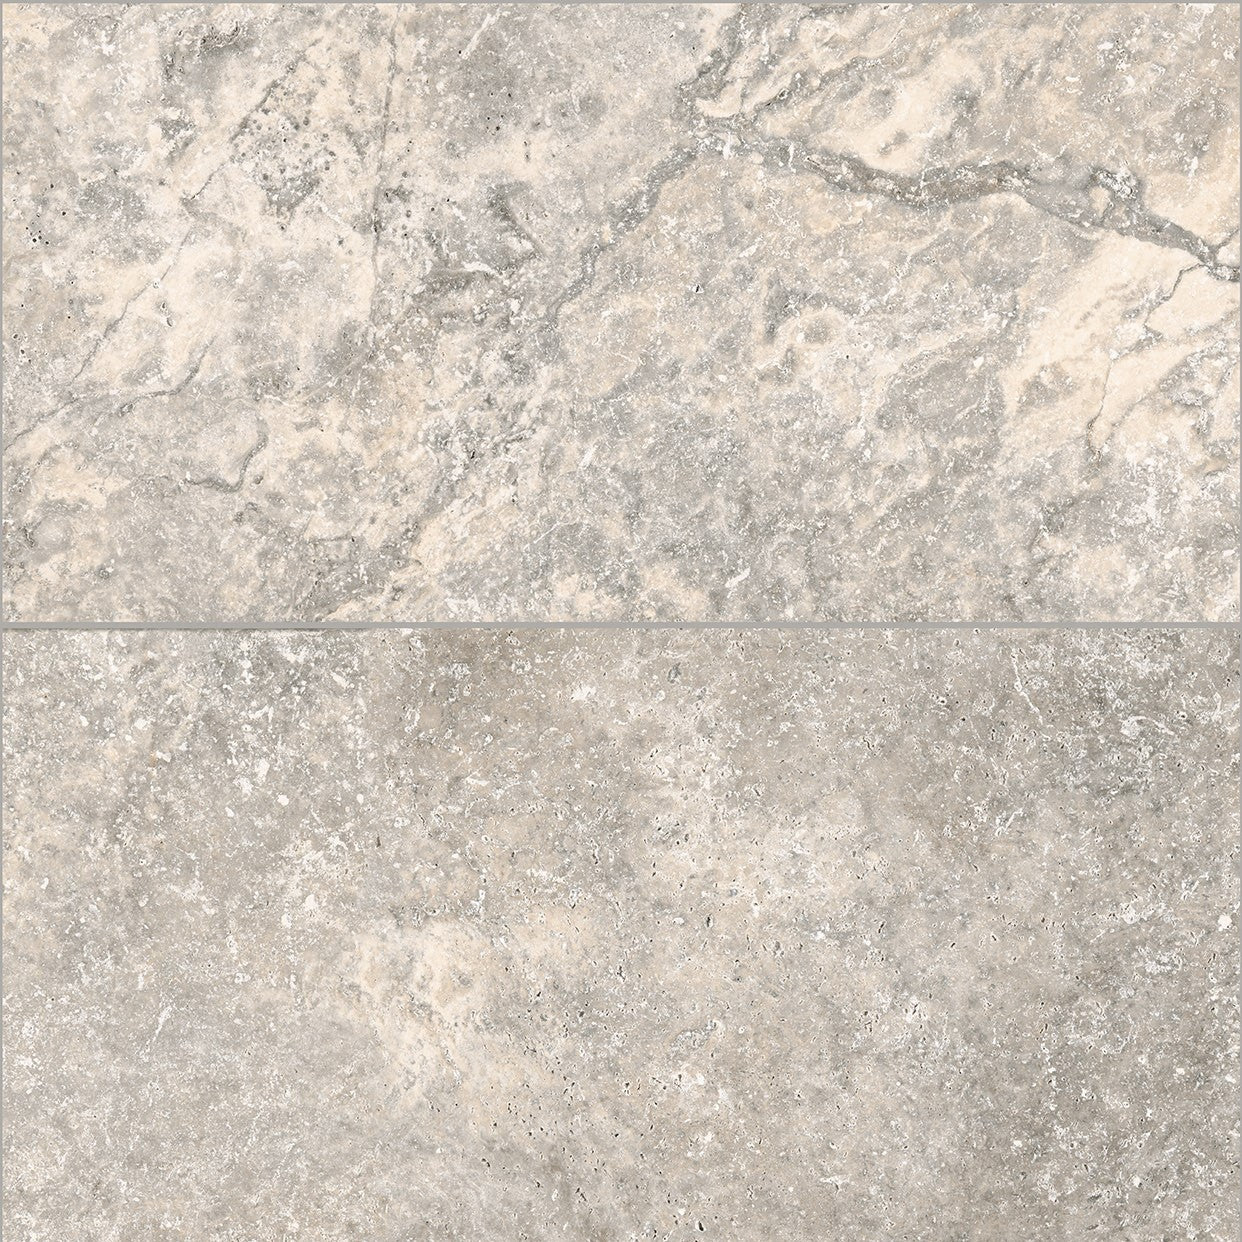 surface group international frontier 20 porcelain paving tile travertine silver cross cut 12x24 for outdoor application manufactured by landmark